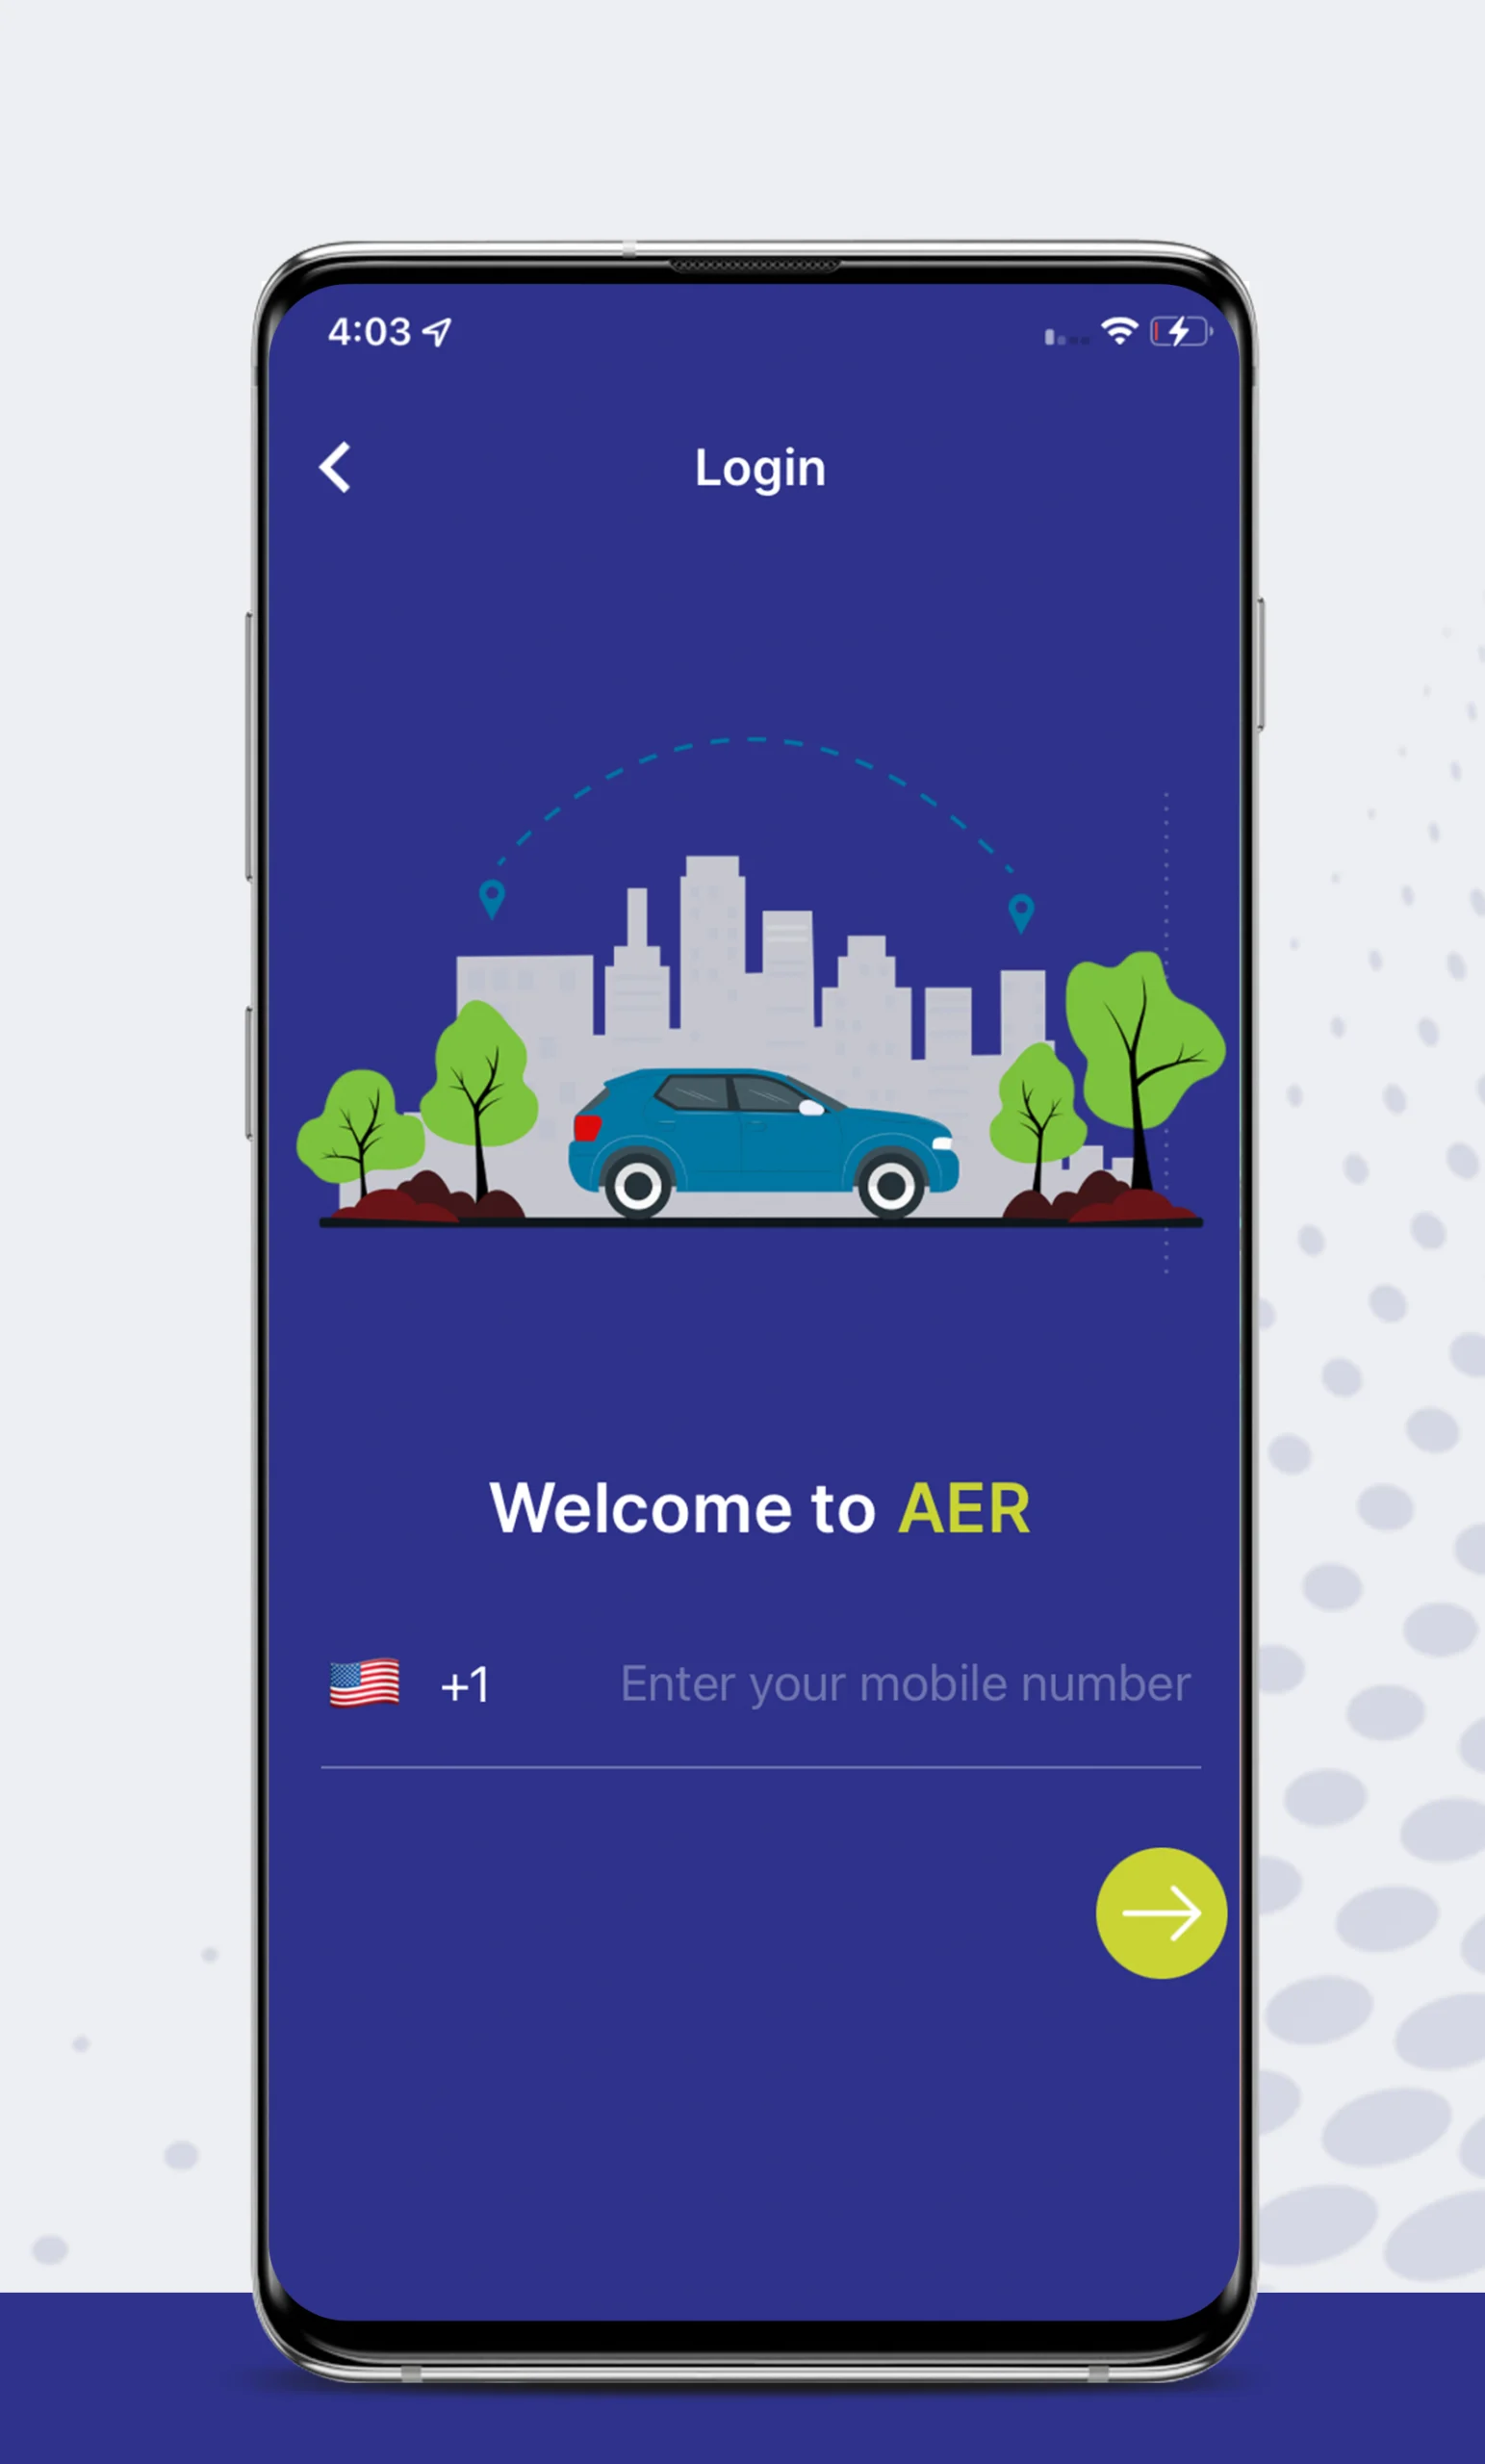 Create a new account in our all electric rideshare app.